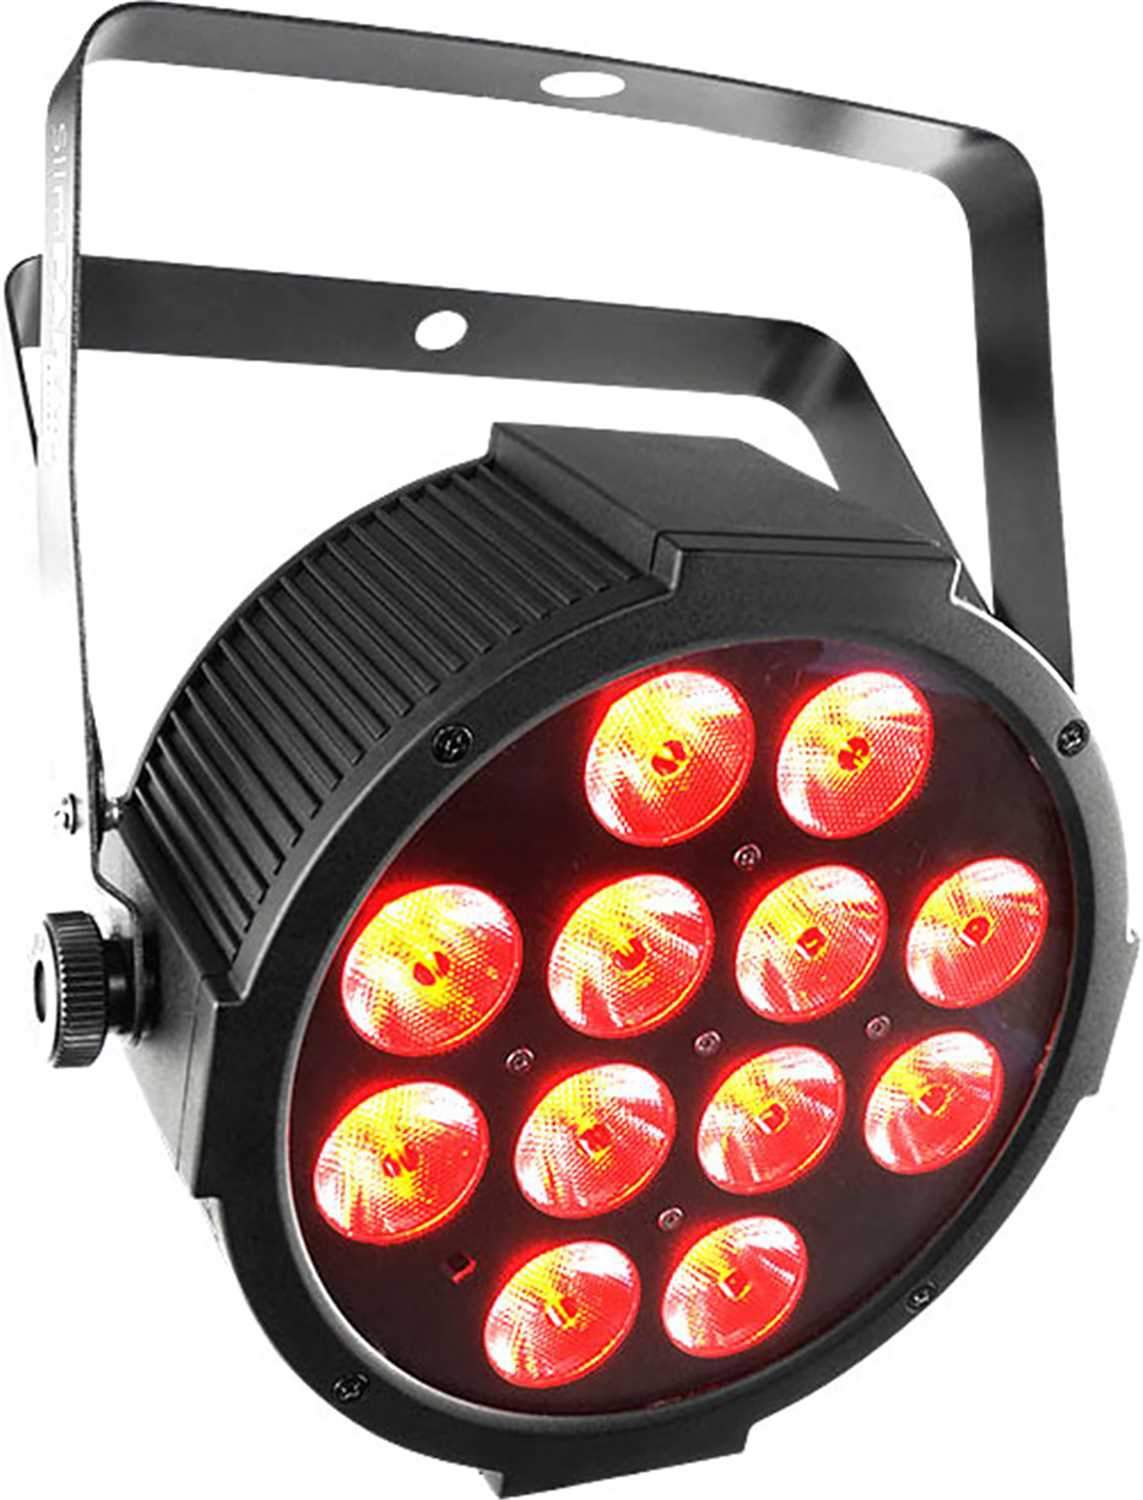 Chauvet SlimPAR Q12 BT Wash Light 2-Pack with Footswitch - PSSL ProSound and Stage Lighting